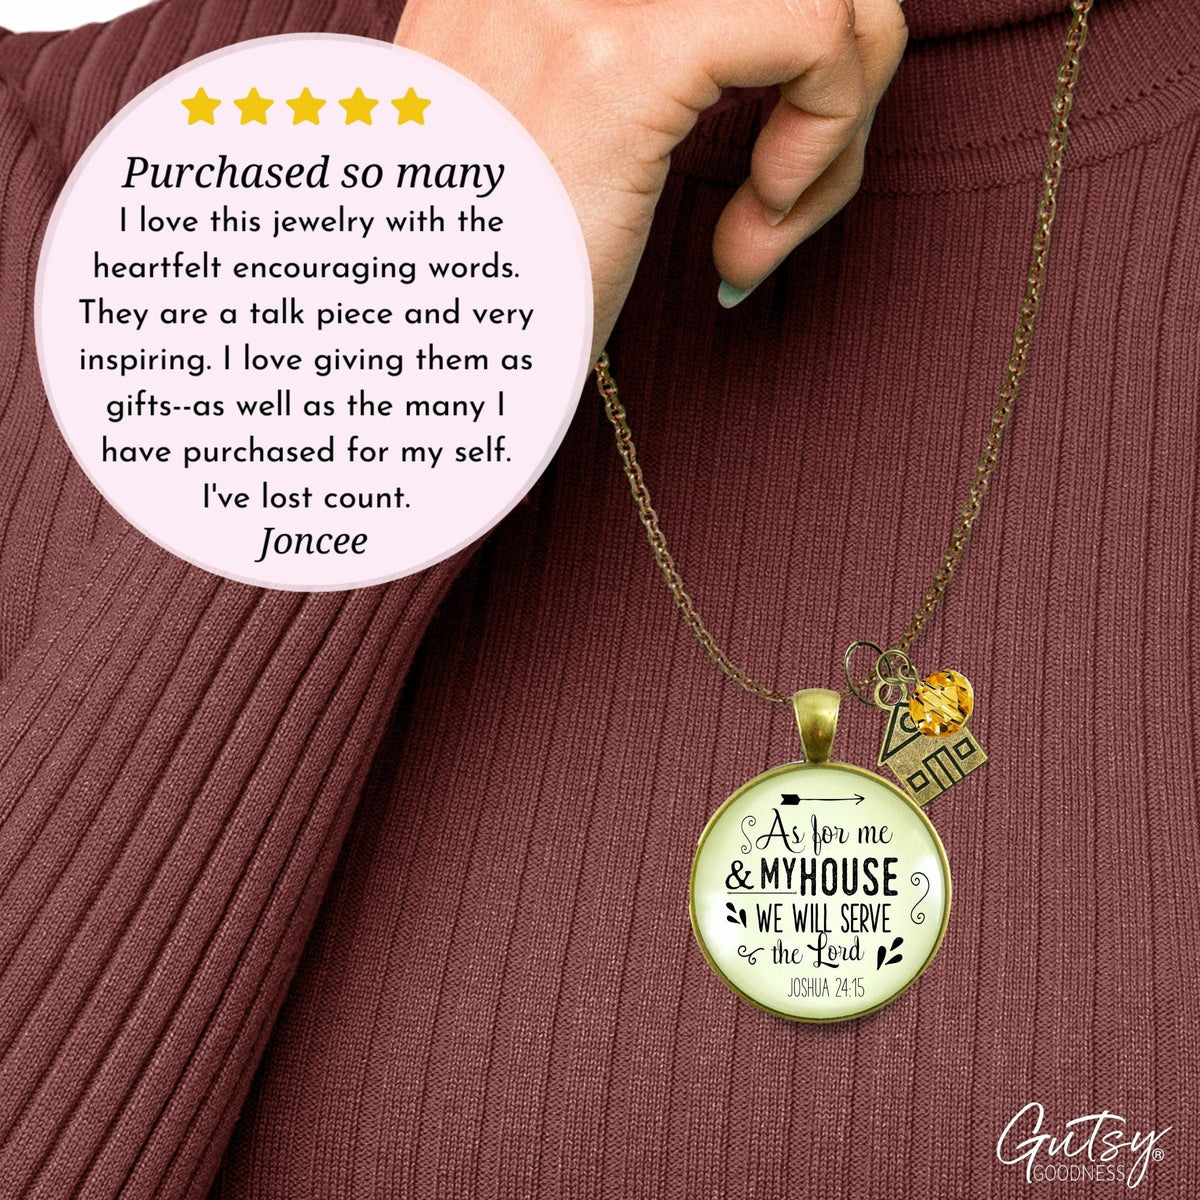 Gutsy Goodness As for My House We Will Serve the Lord Necklace Faith Charm Jewelry - Gutsy Goodness Handmade Jewelry;As For My House We Will Serve The Lord Necklace Faith Charm Jewelry - Gutsy Goodness Handmade Jewelry Gifts